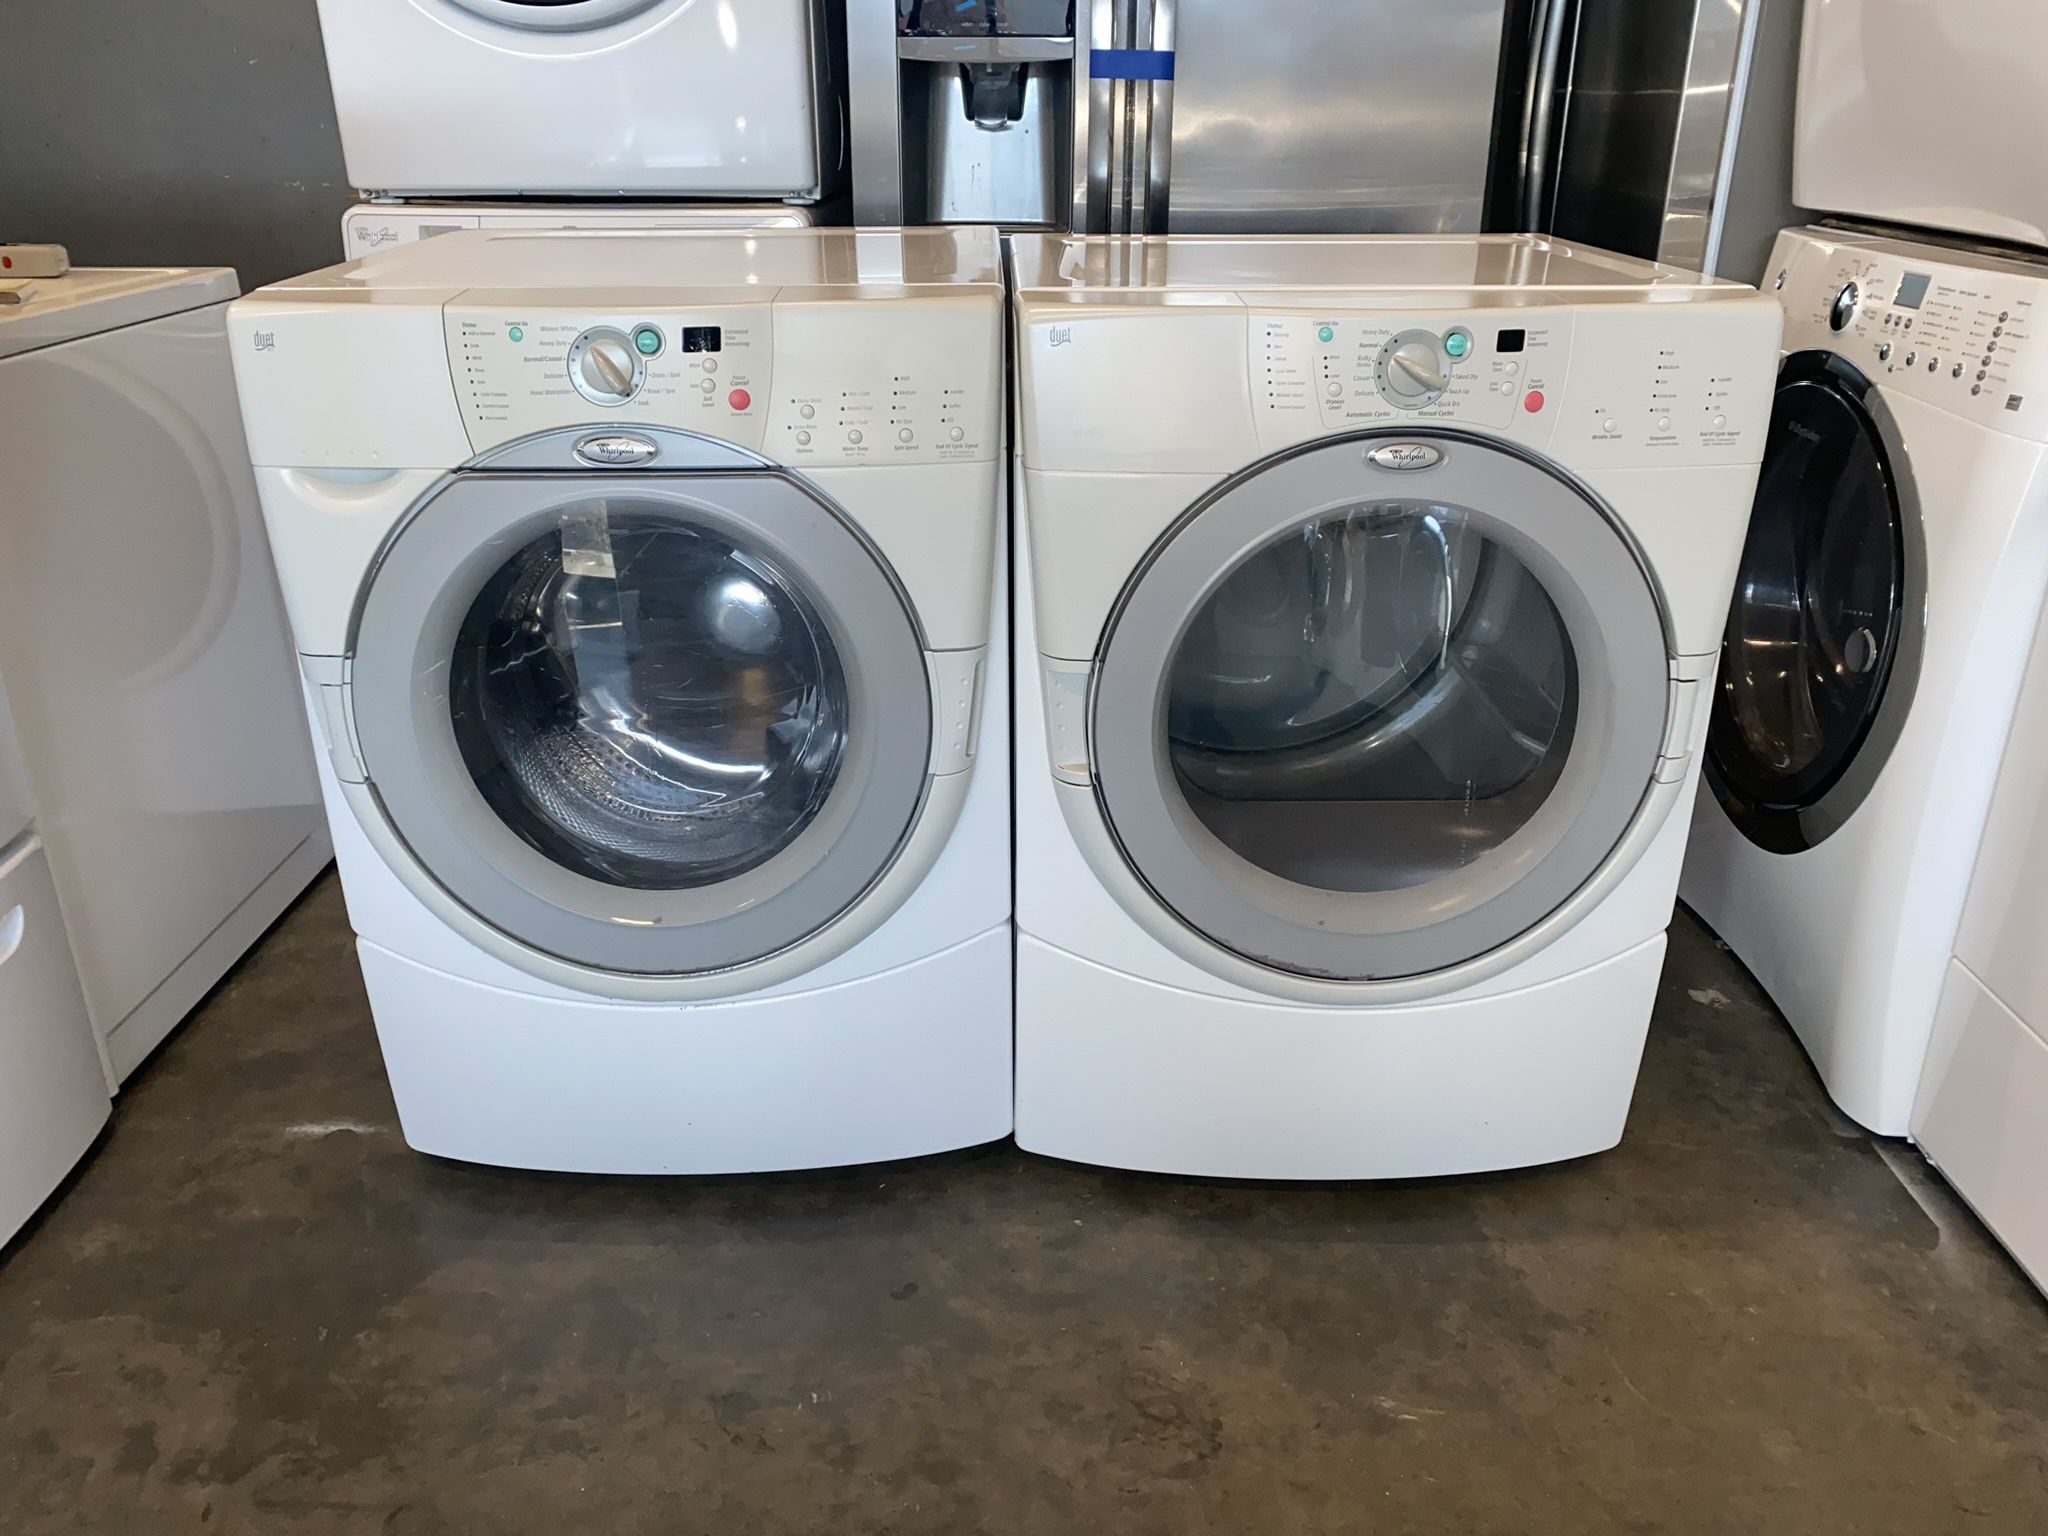 WHIRLPOOL XL CAPACITY WASHER DRYER ELECTRIC SET 